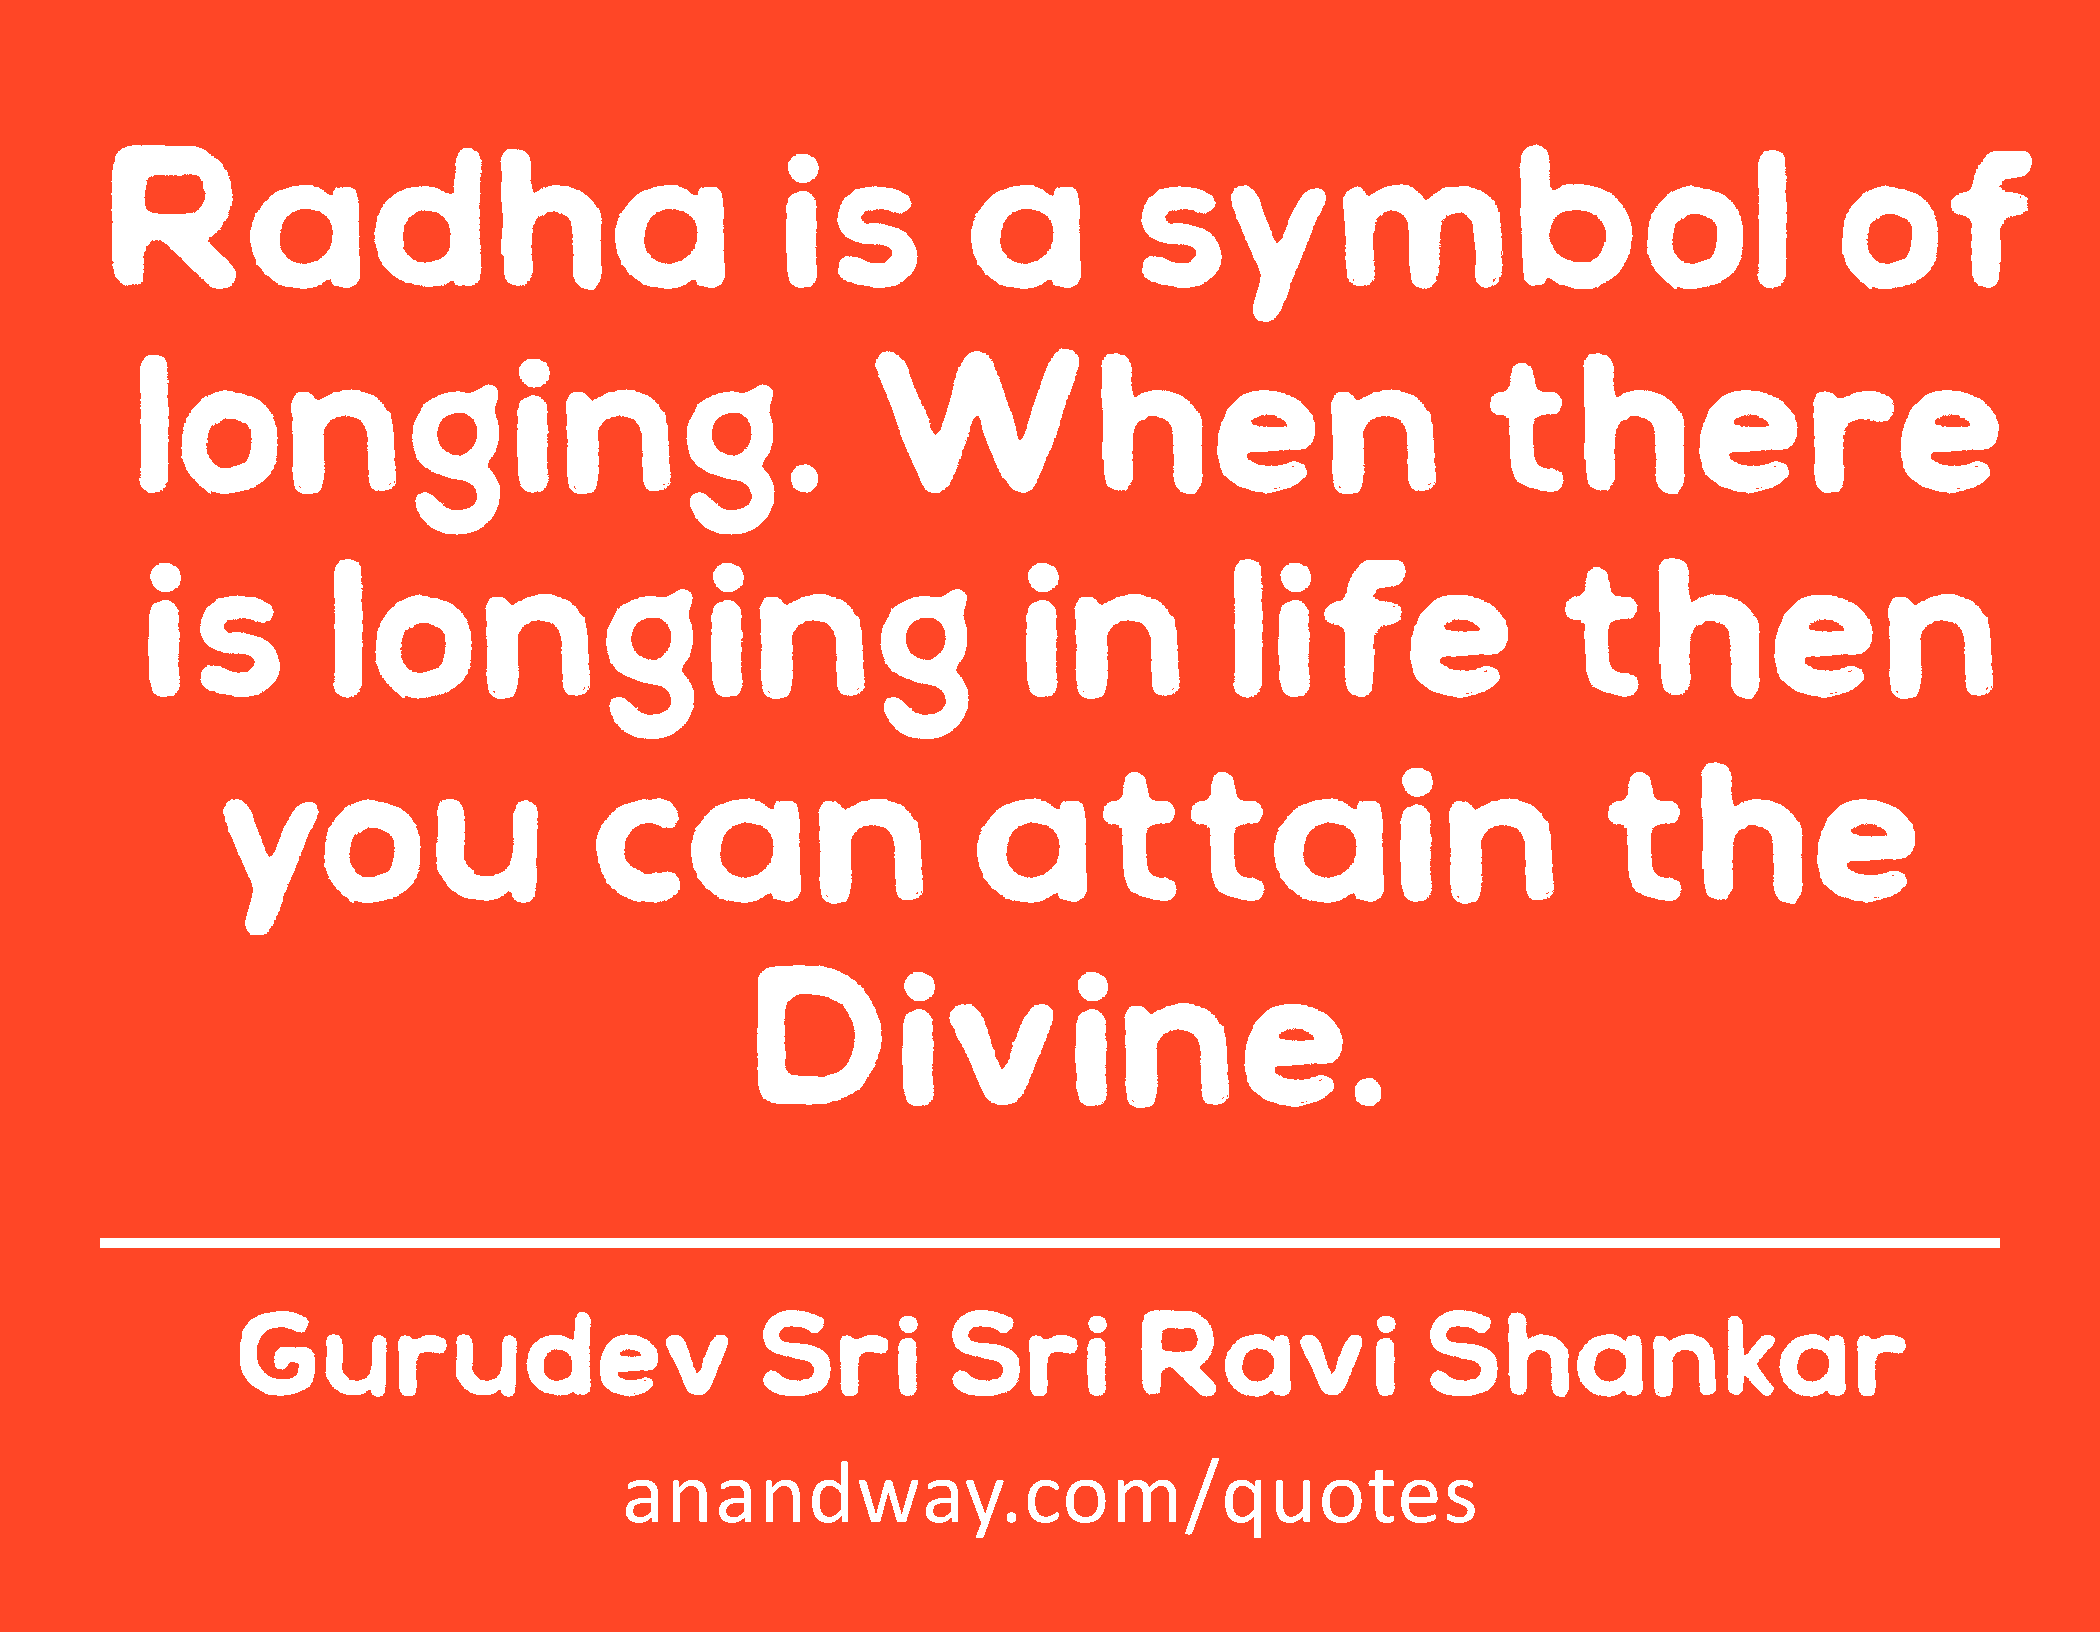 Radha is a symbol of longing. When there is longing in life then you can attain the Divine. 
 -Gurudev Sri Sri Ravi Shankar